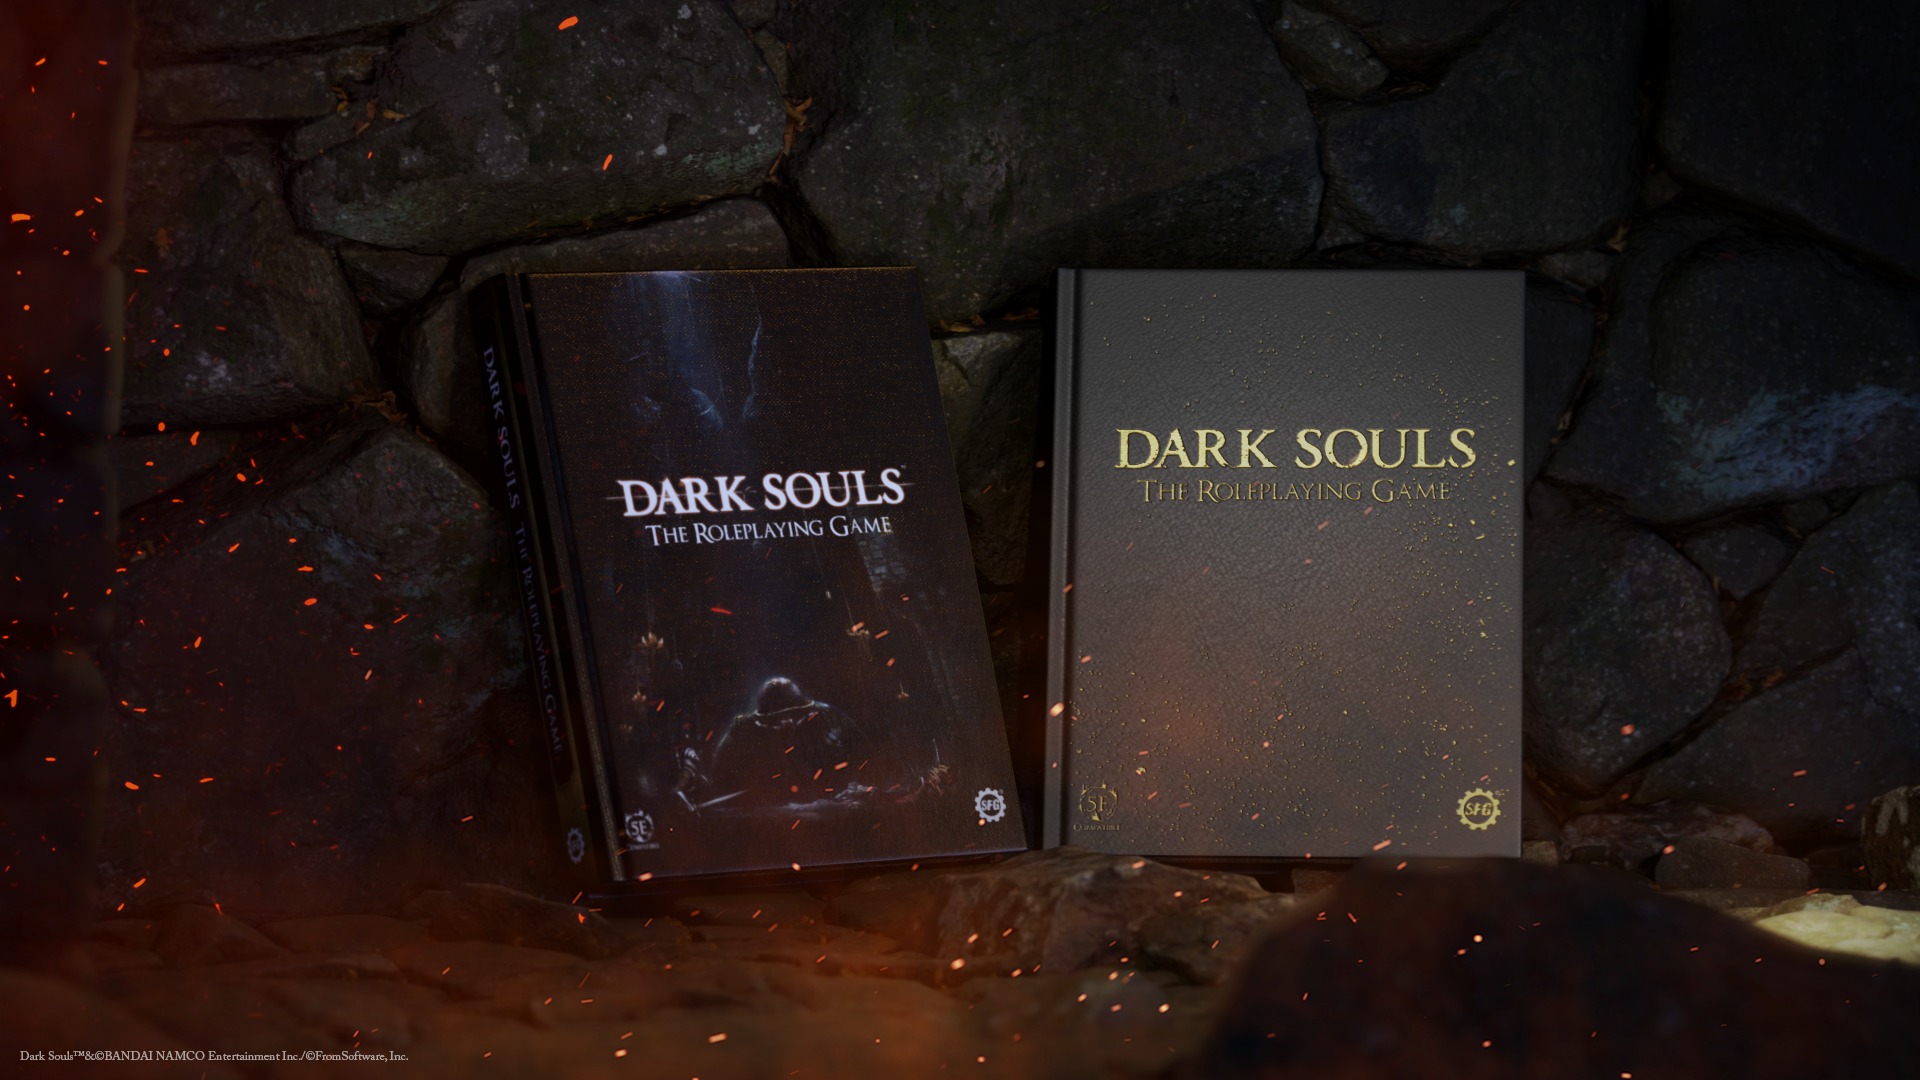 Dark Souls The Roleplaying Game Update - Steamforged Games